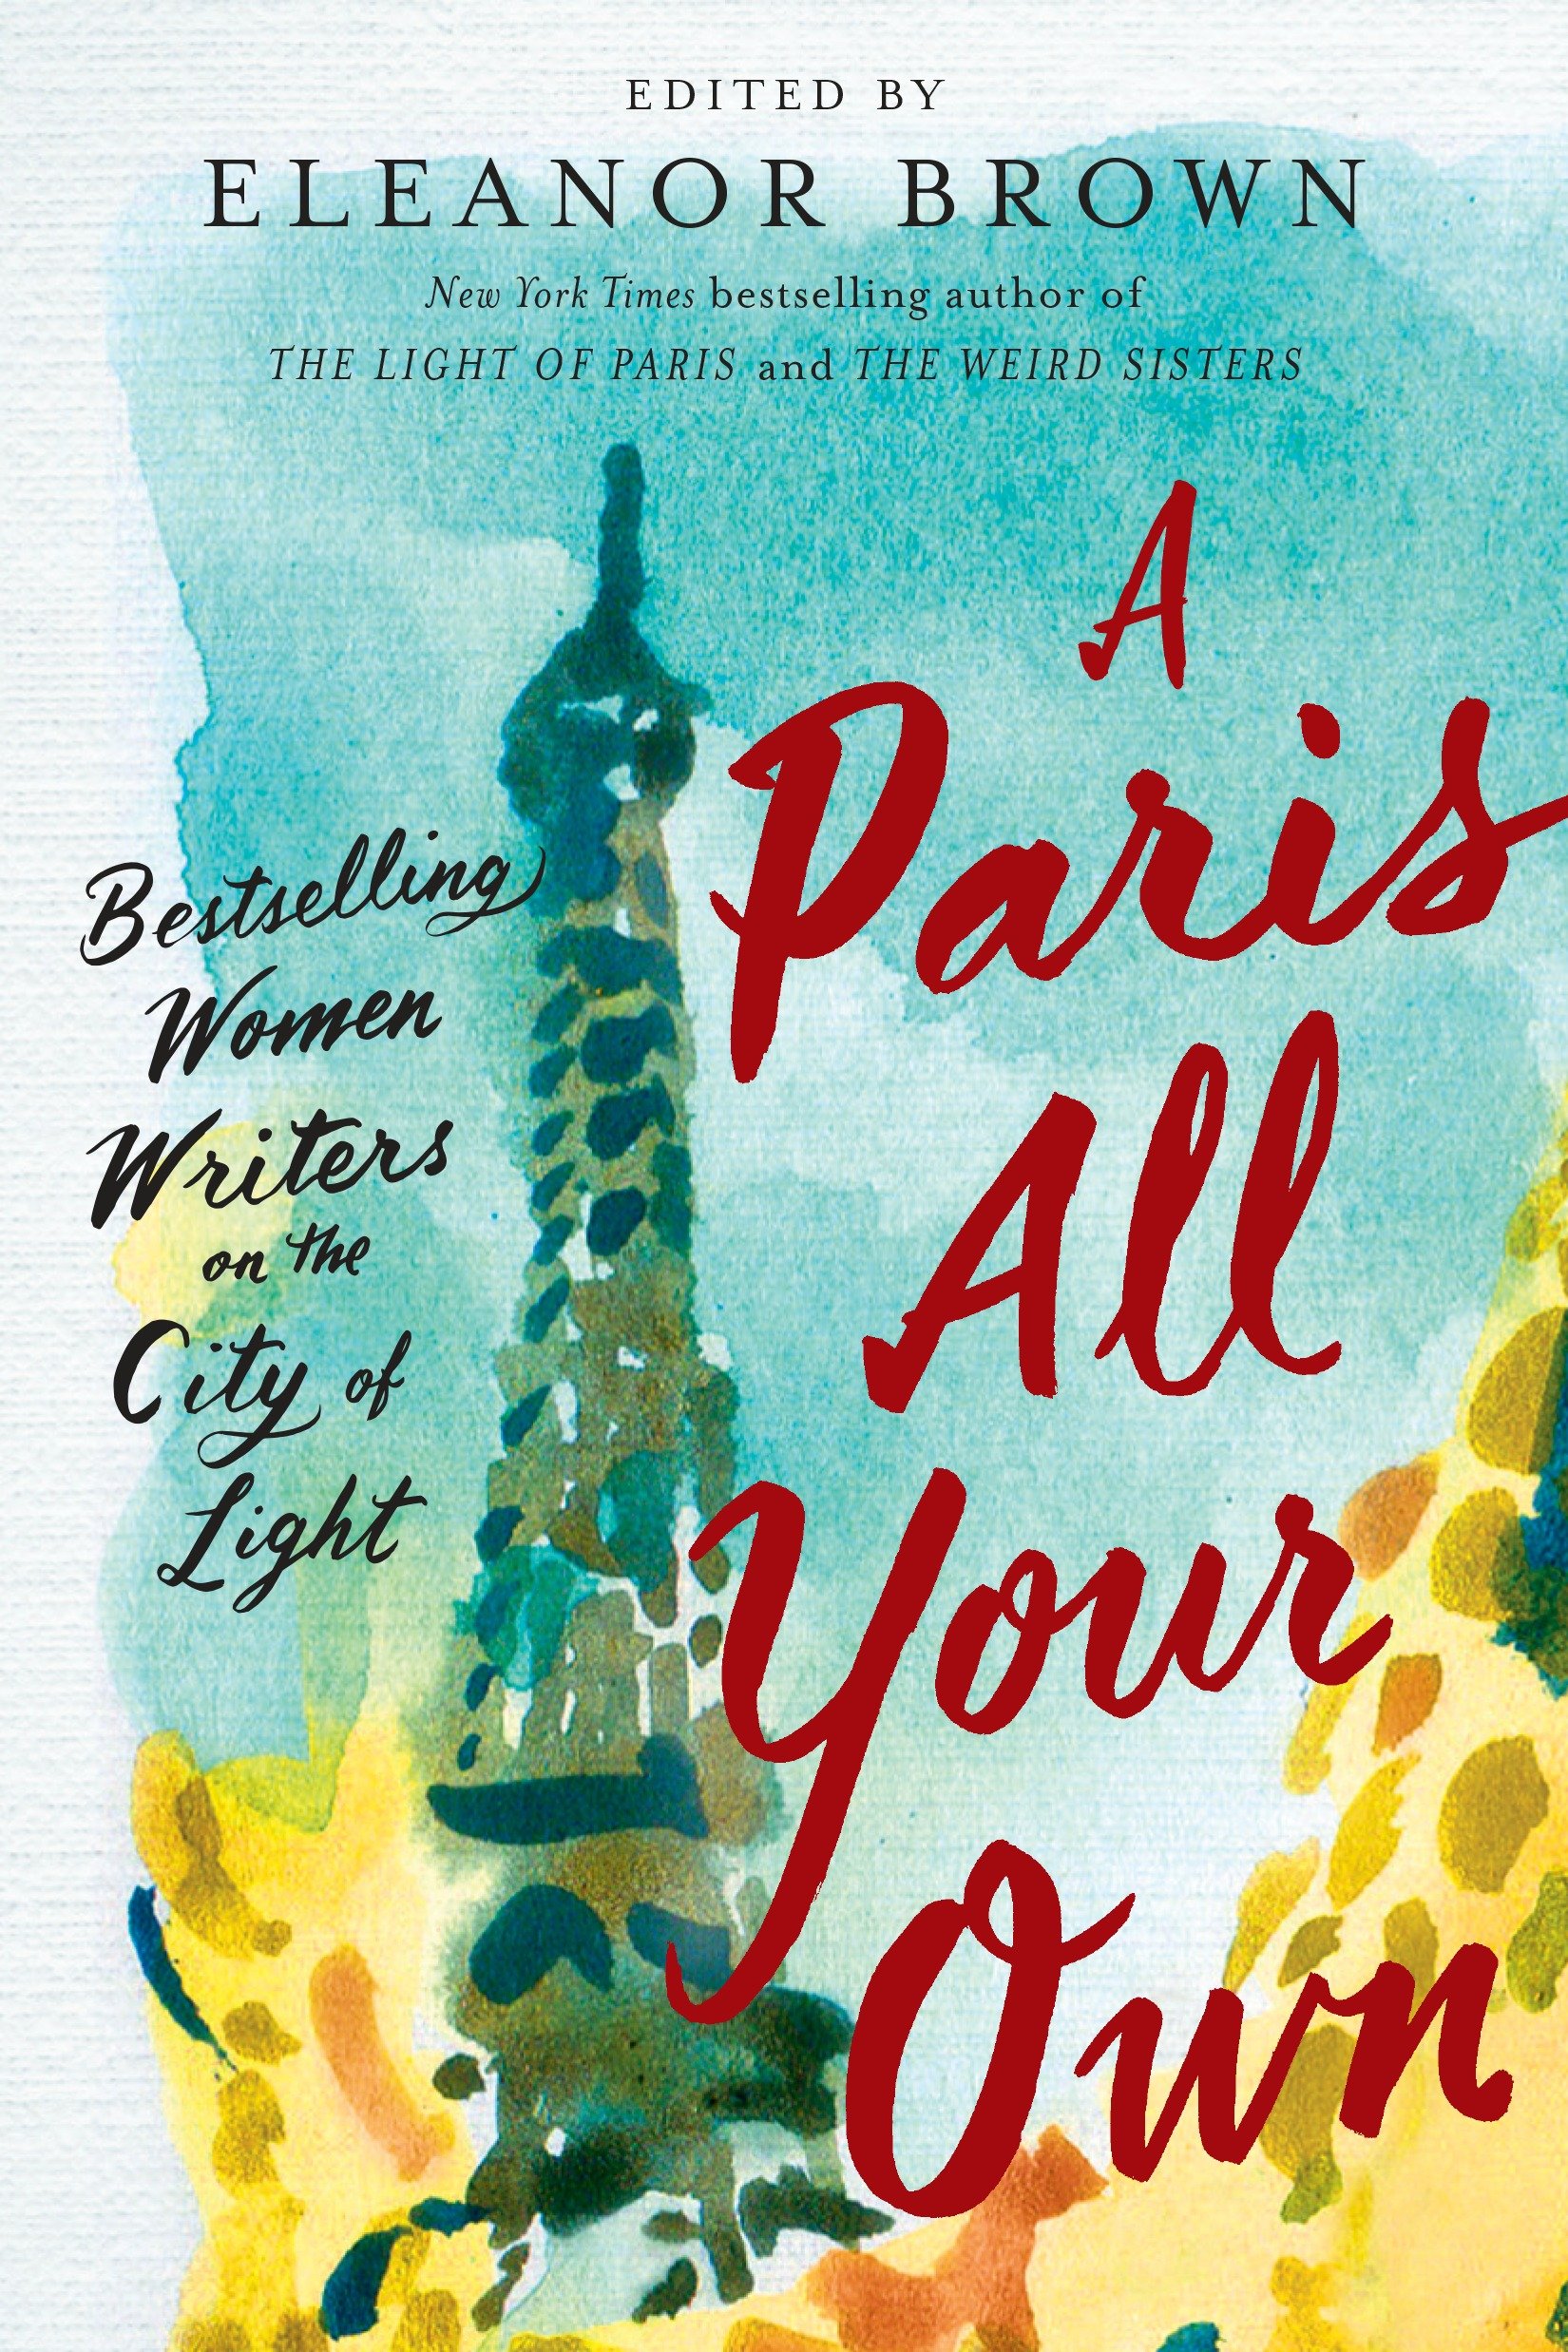 Image de couverture de A Paris All Your Own [electronic resource] : Bestselling Women Writers on the City of Light